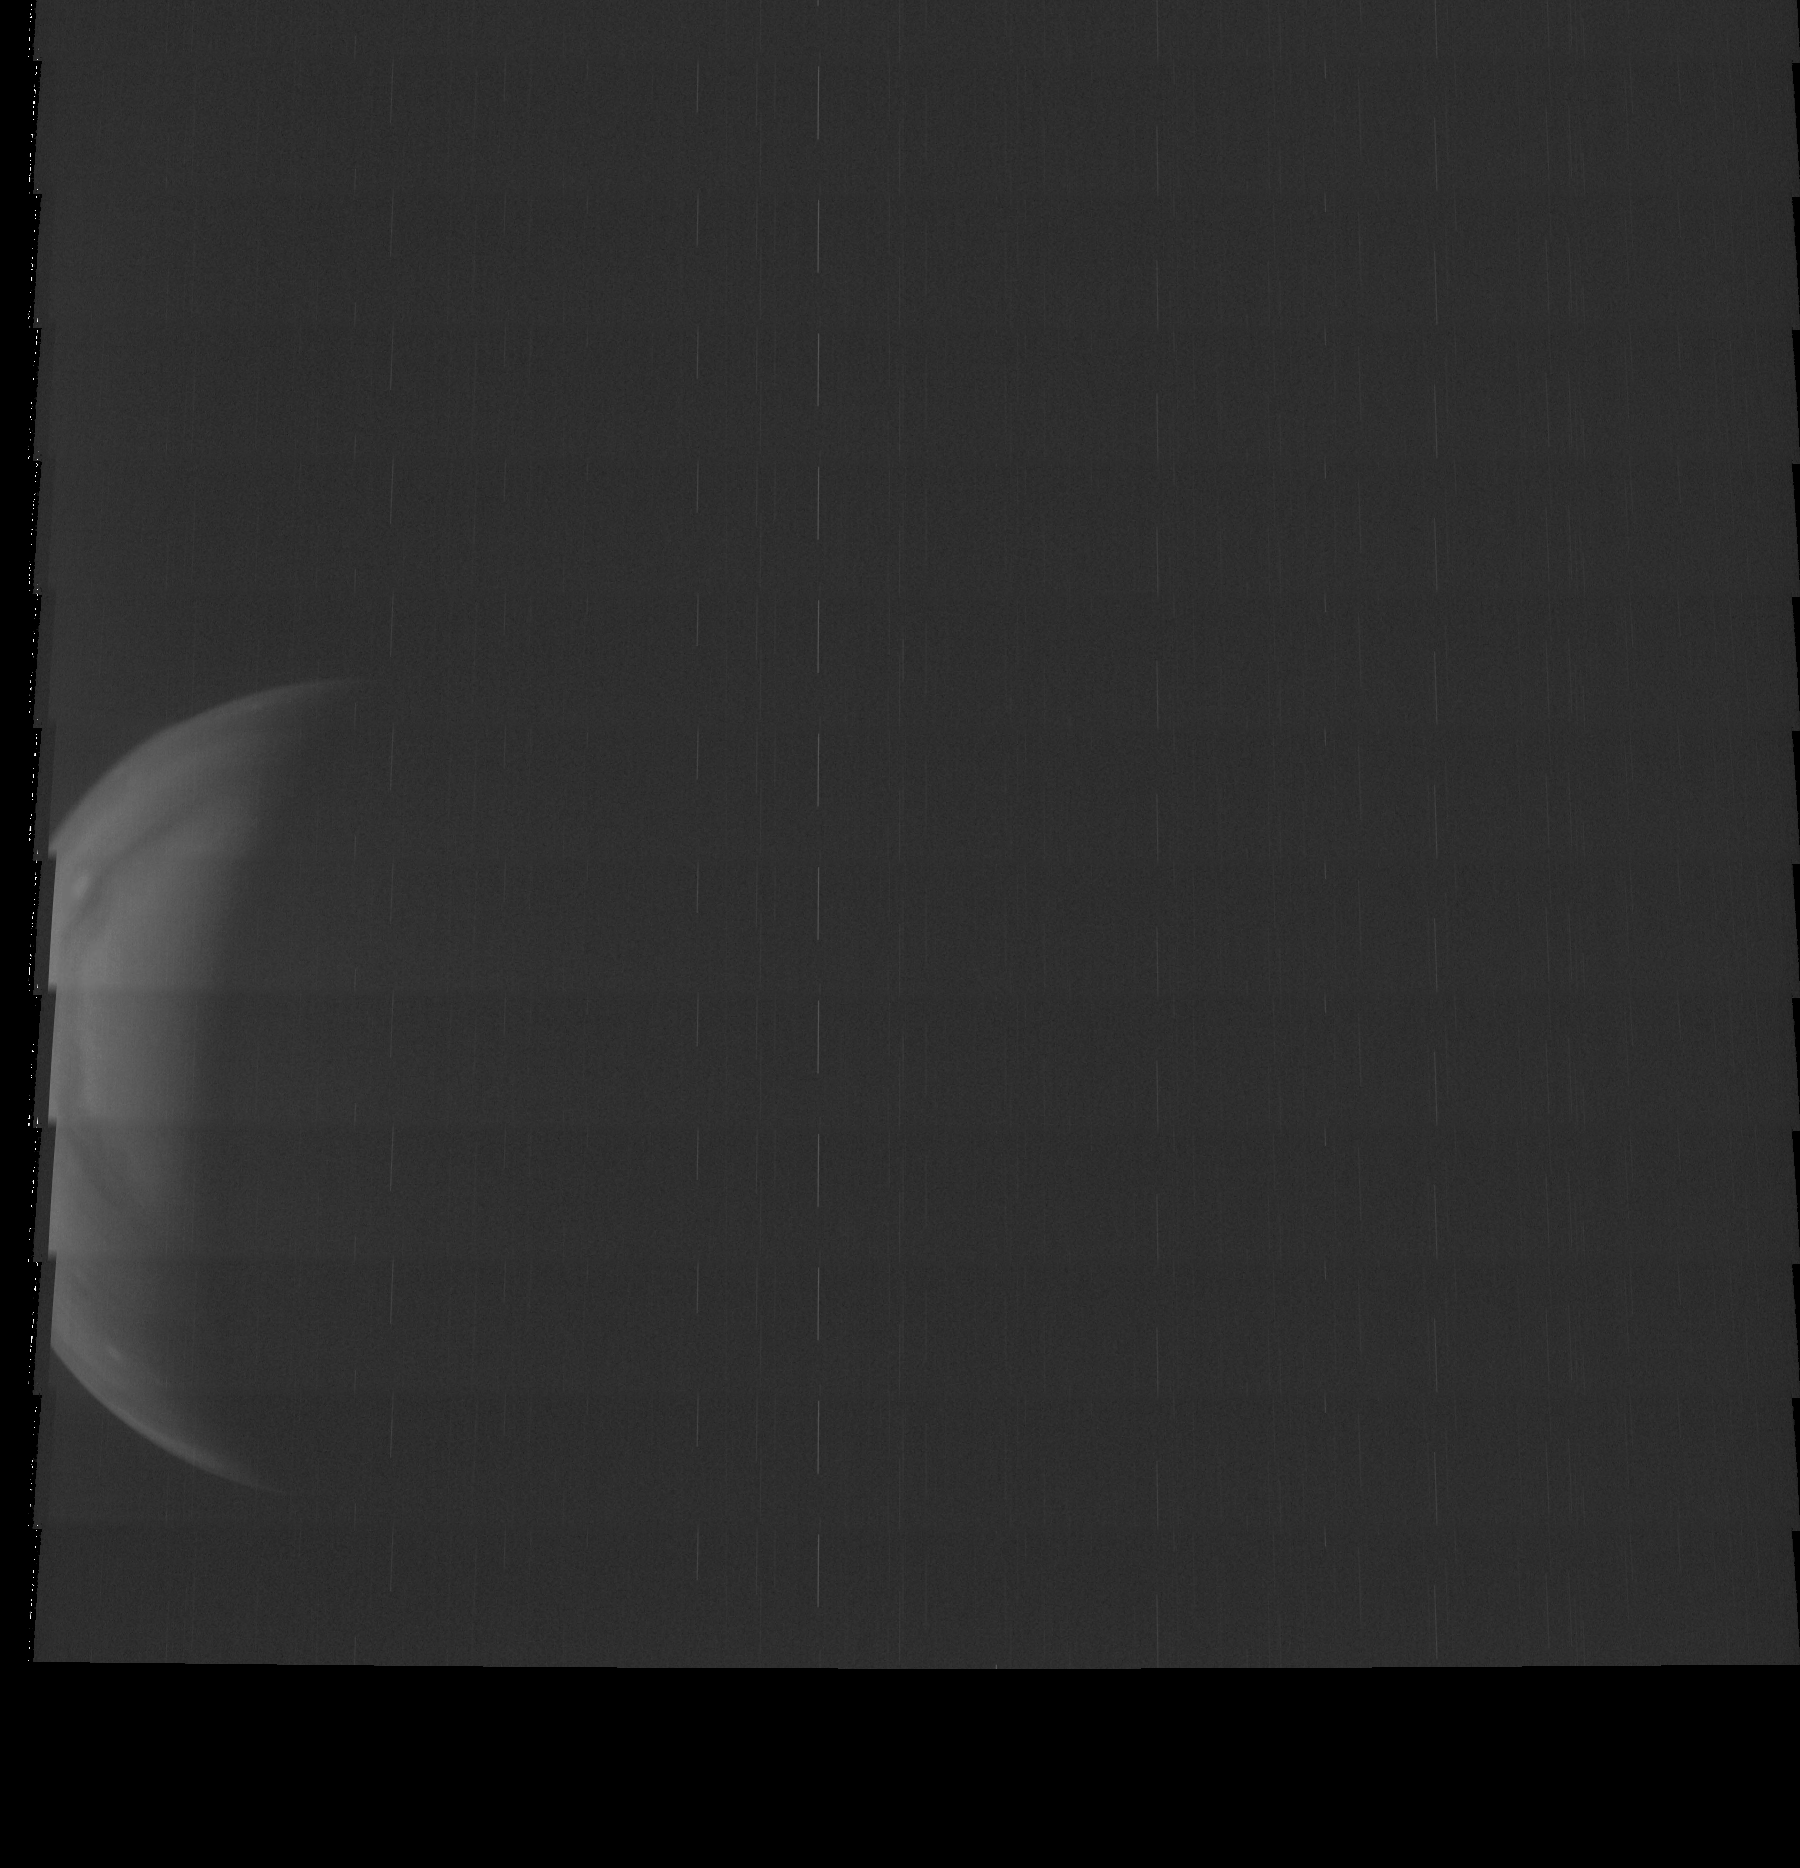 JNCE_2024100_60M00088_V01-raw_proc_hollow_sphere_m_pj_out.BMP_thumbnail_.png